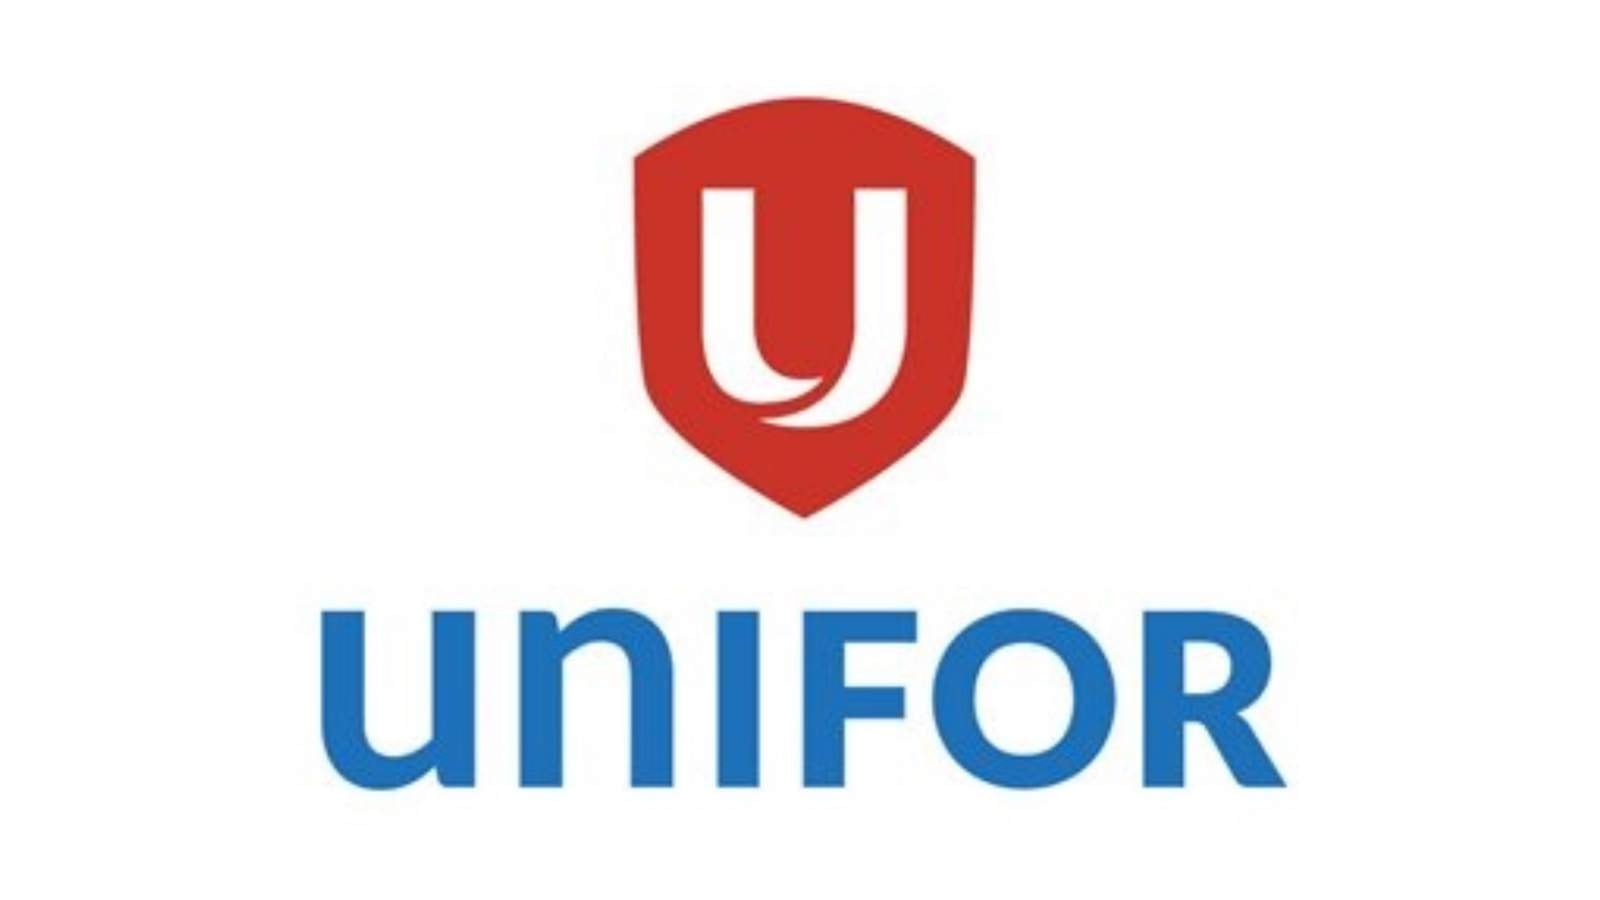 Unifor reaches tentative agreement with General Motors to avoid strike